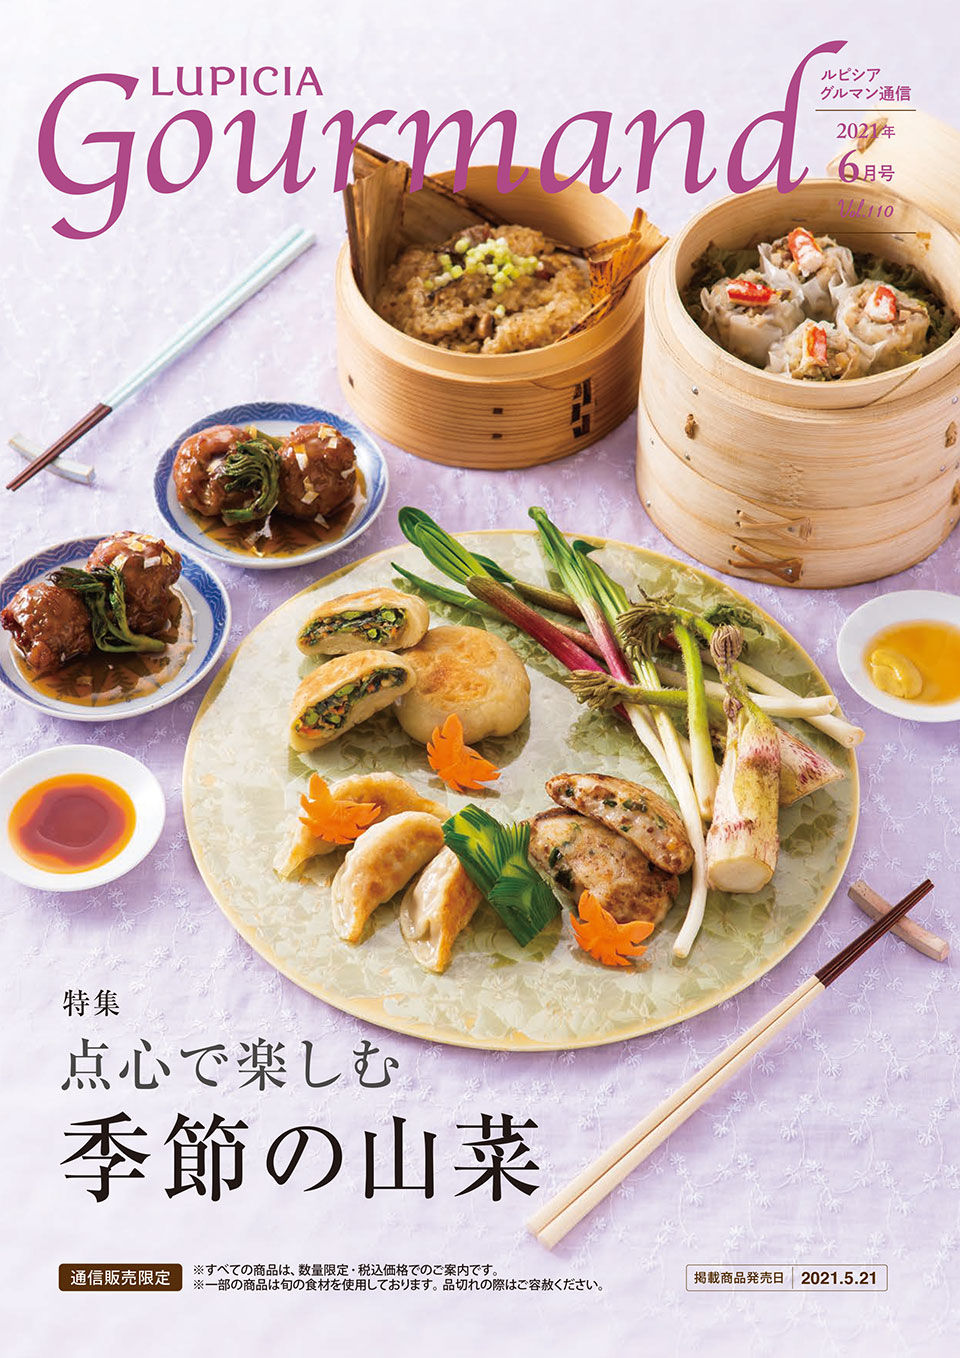 Lupicia Gourmand ルピシア グルマン通信6月号 Vol 110 Gourmand Online Store 食のセレクトショップ ルピシア グルマン